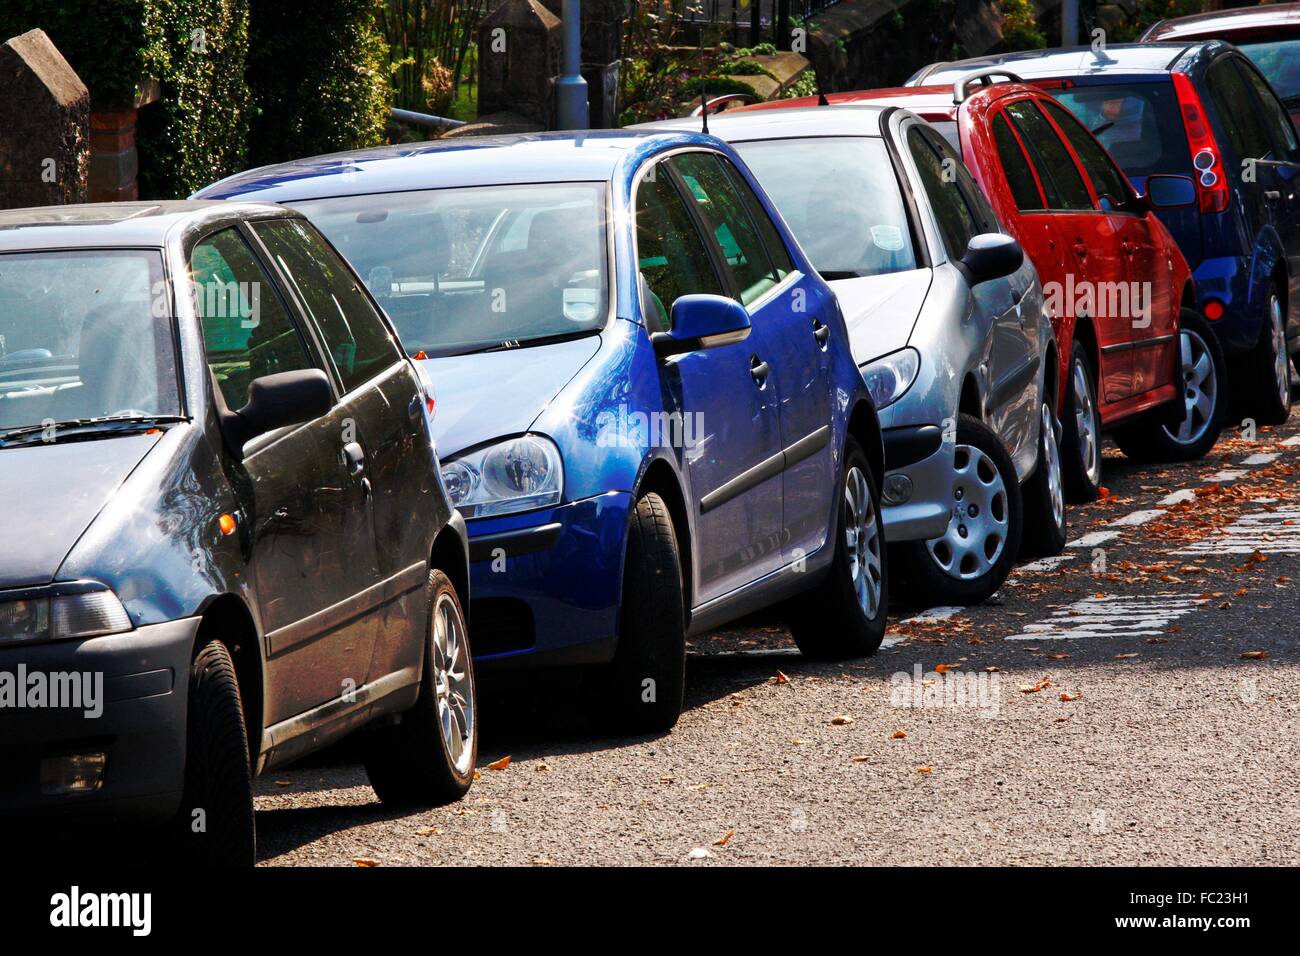 Cars tightly parked in an urban street Stock Photo